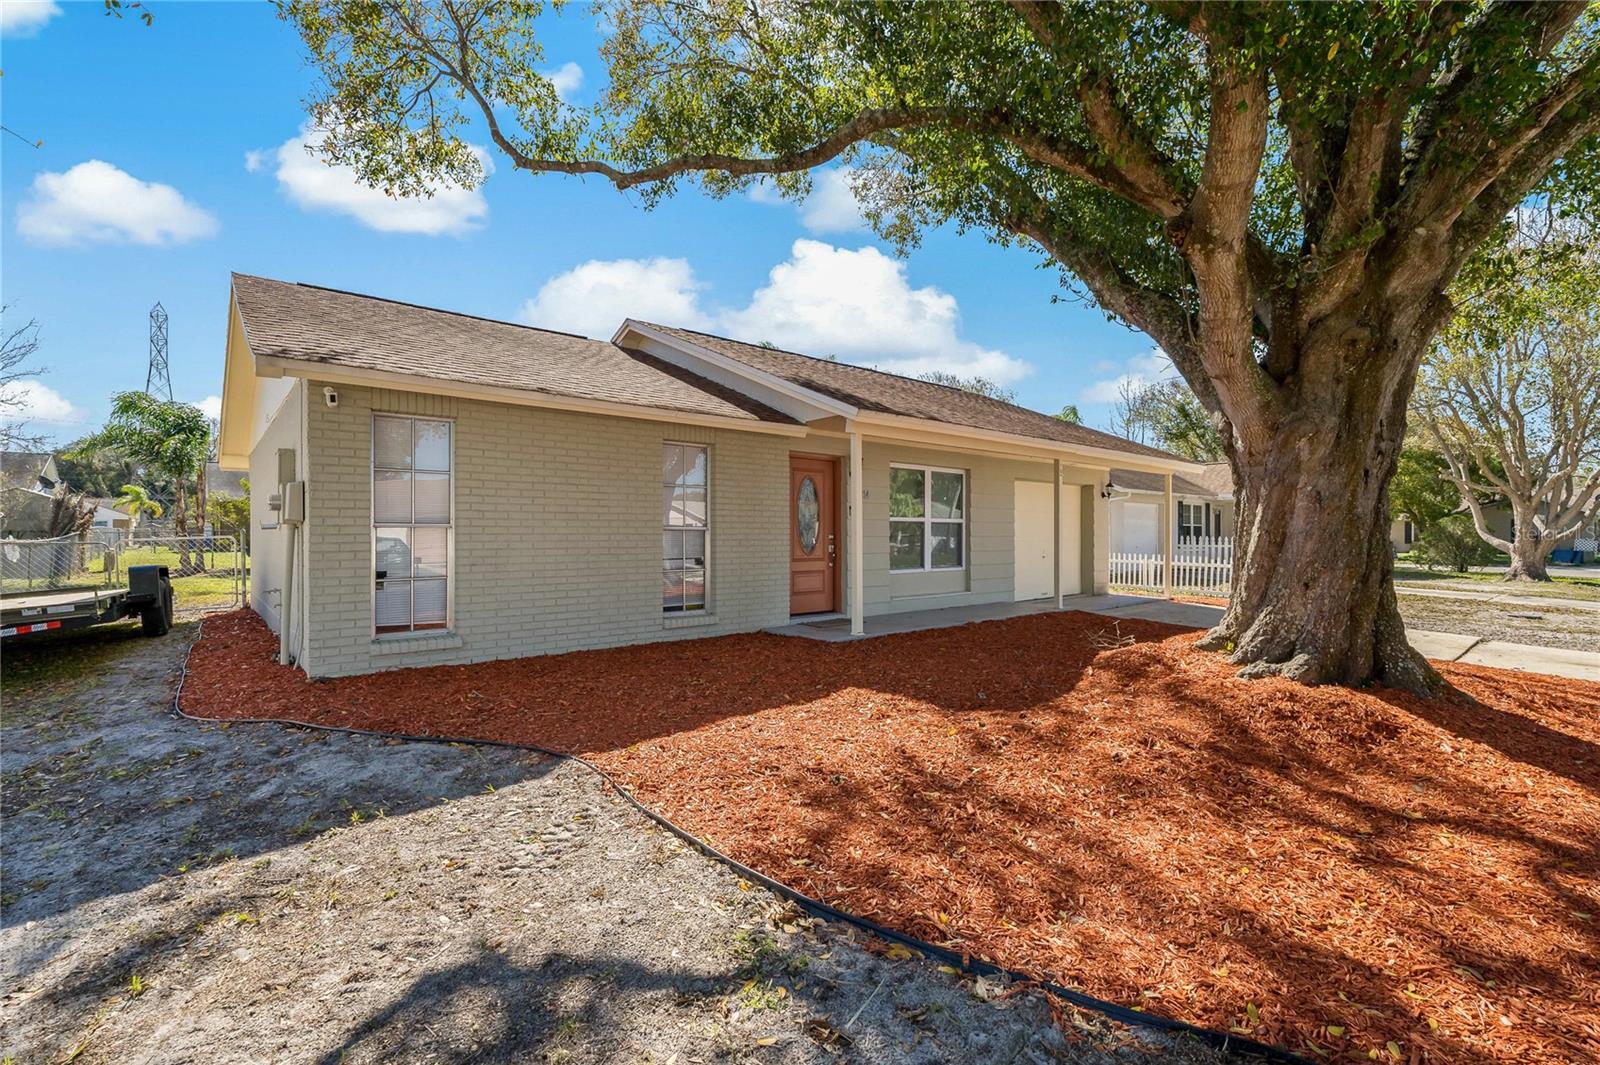 Details for 6814 Willits Avenue, NEW PORT RICHEY, FL 34655